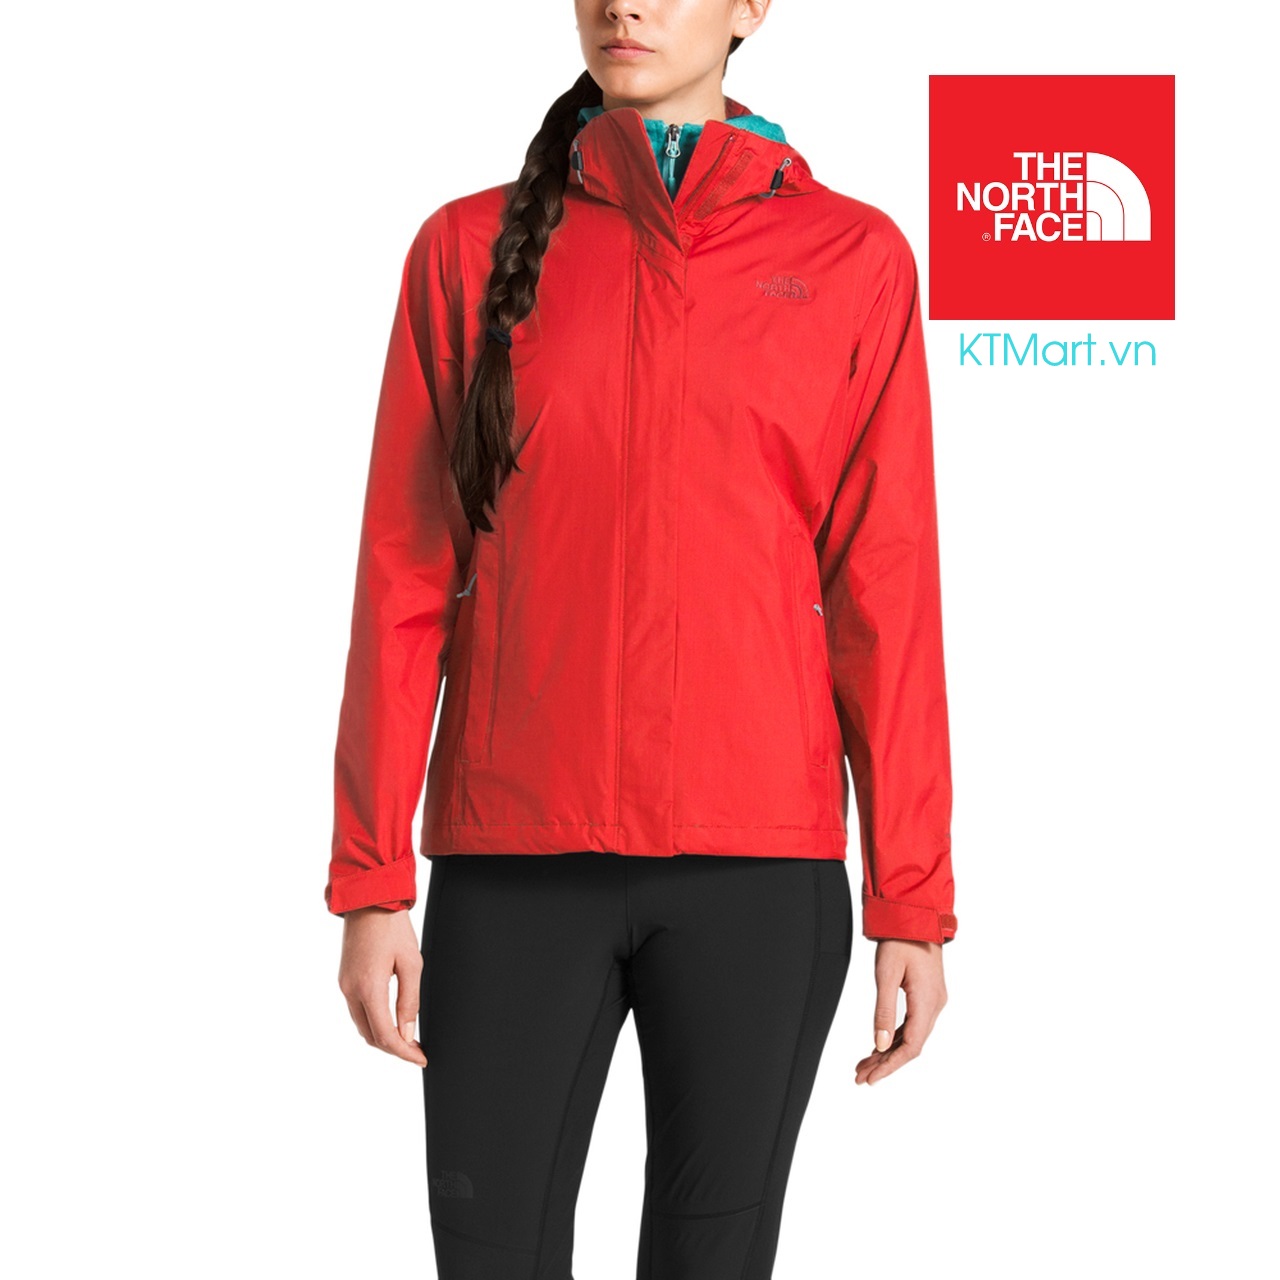 The North Face Women’s Venture 2 Jacket A8AS-C1 The North Face size M